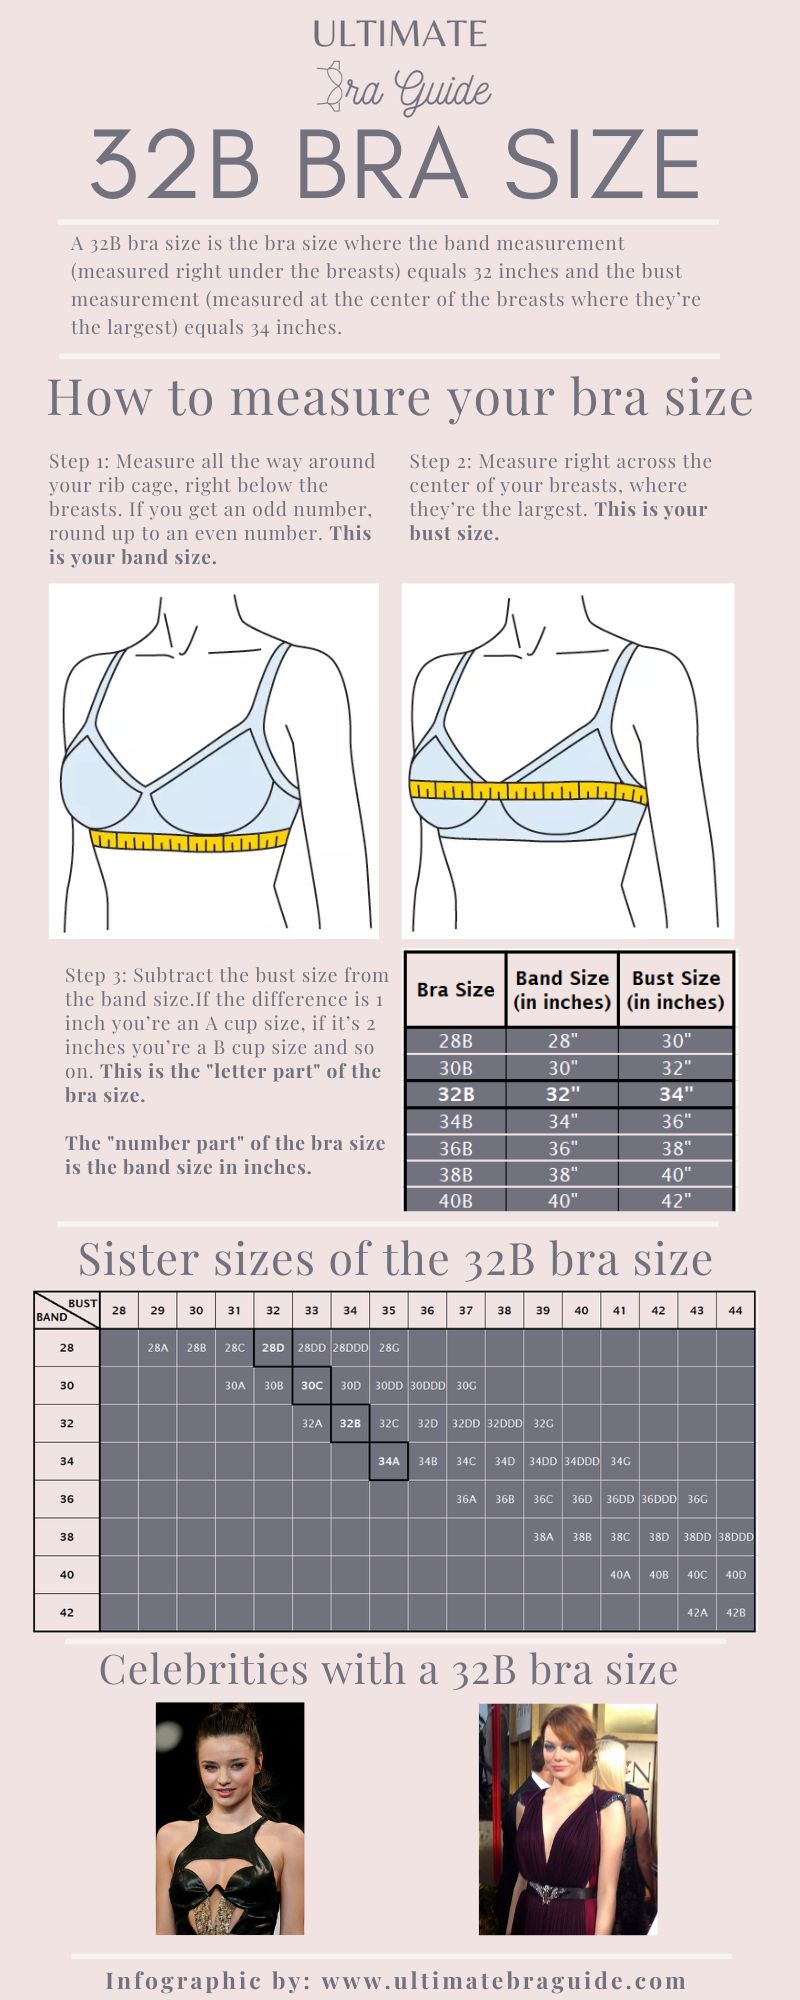 An infographic all about the 32B bra size - what it is, how to measure if you're 32B bra size, 32B bra sister sizes, 32B cup examples, and so on